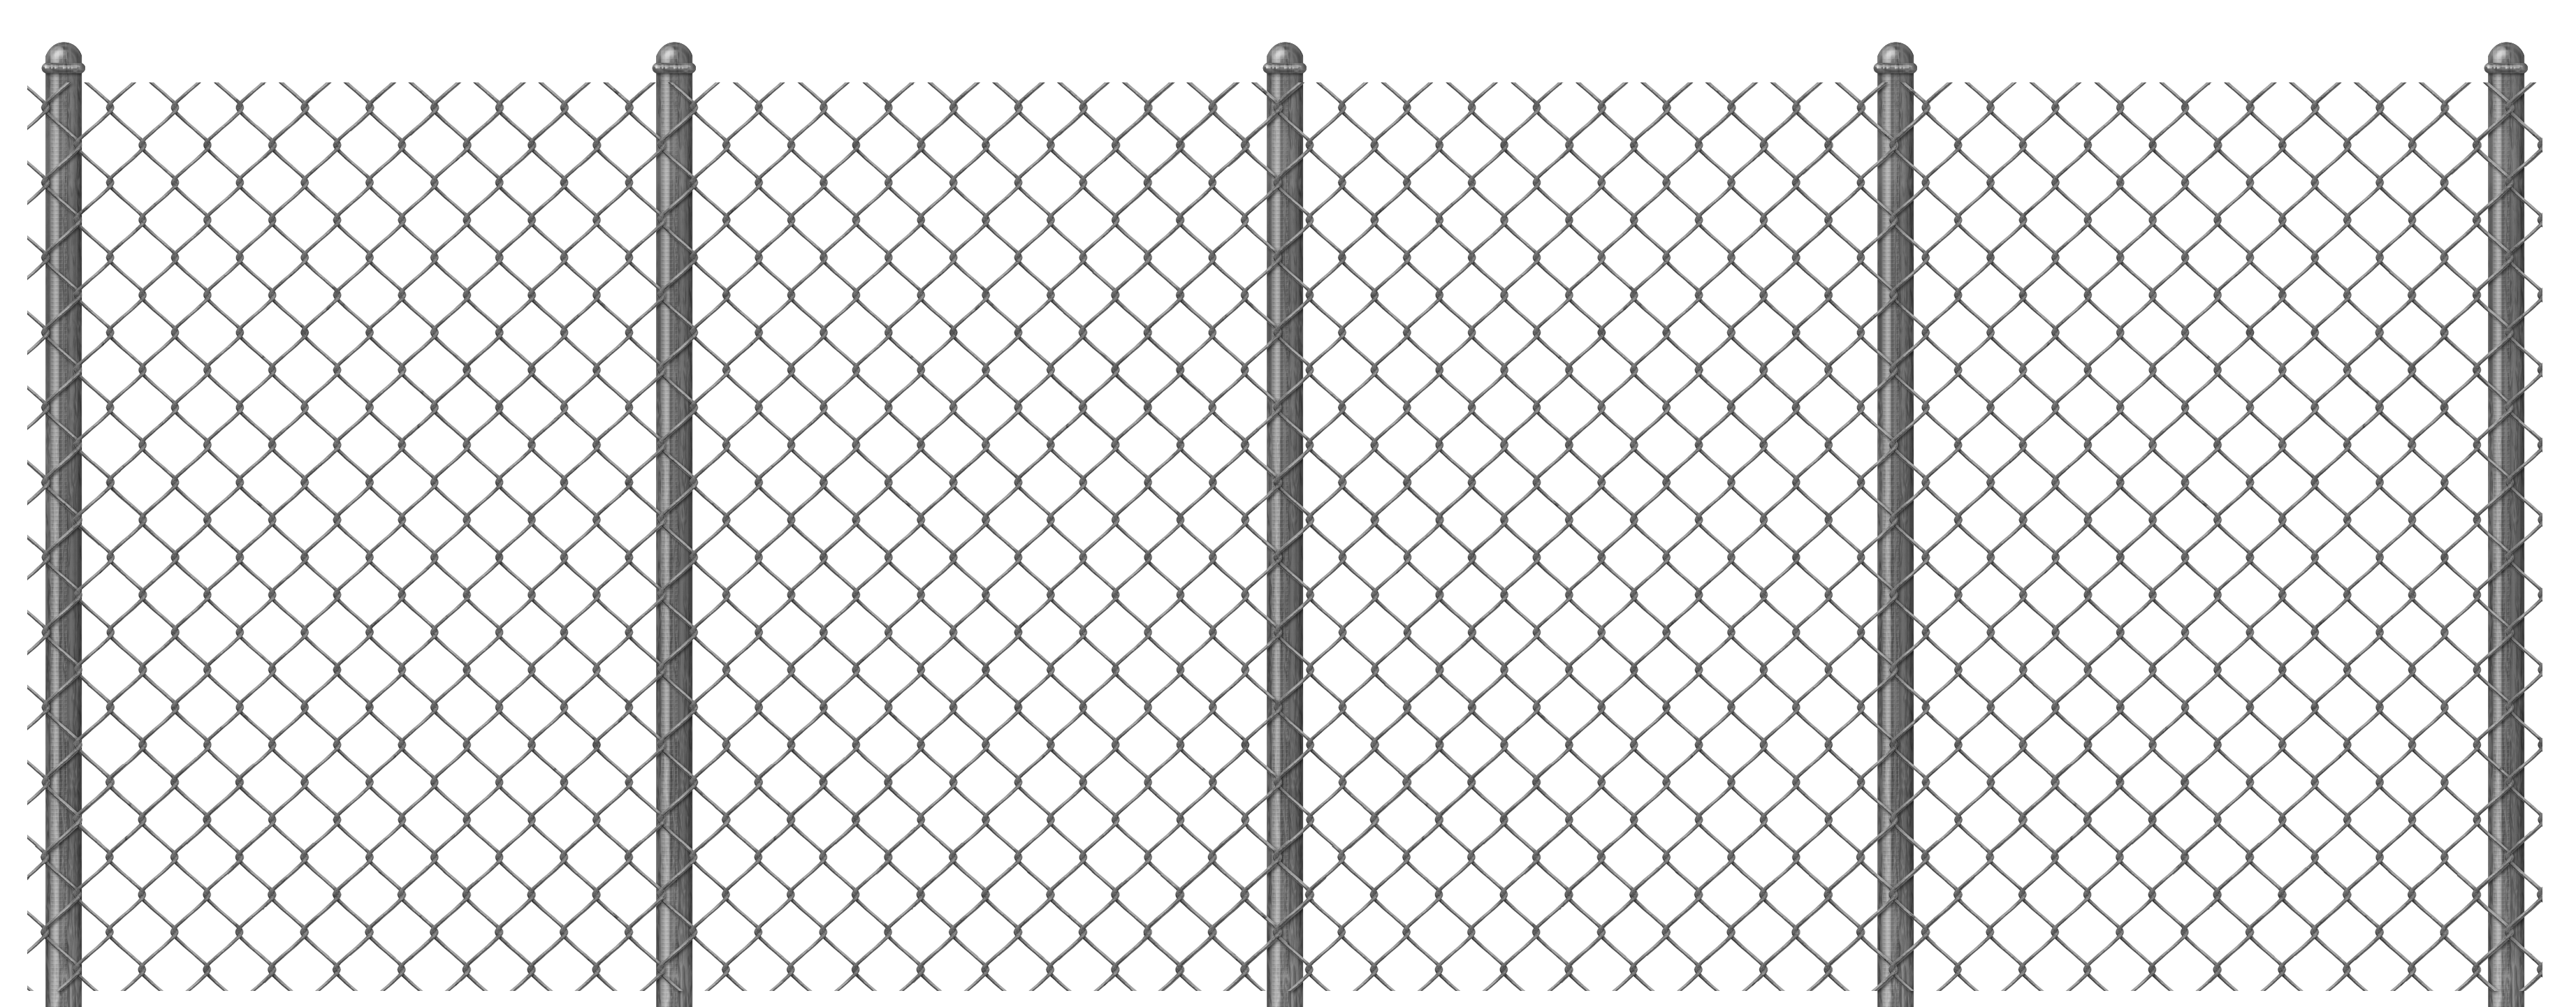 Fence PNG images free download